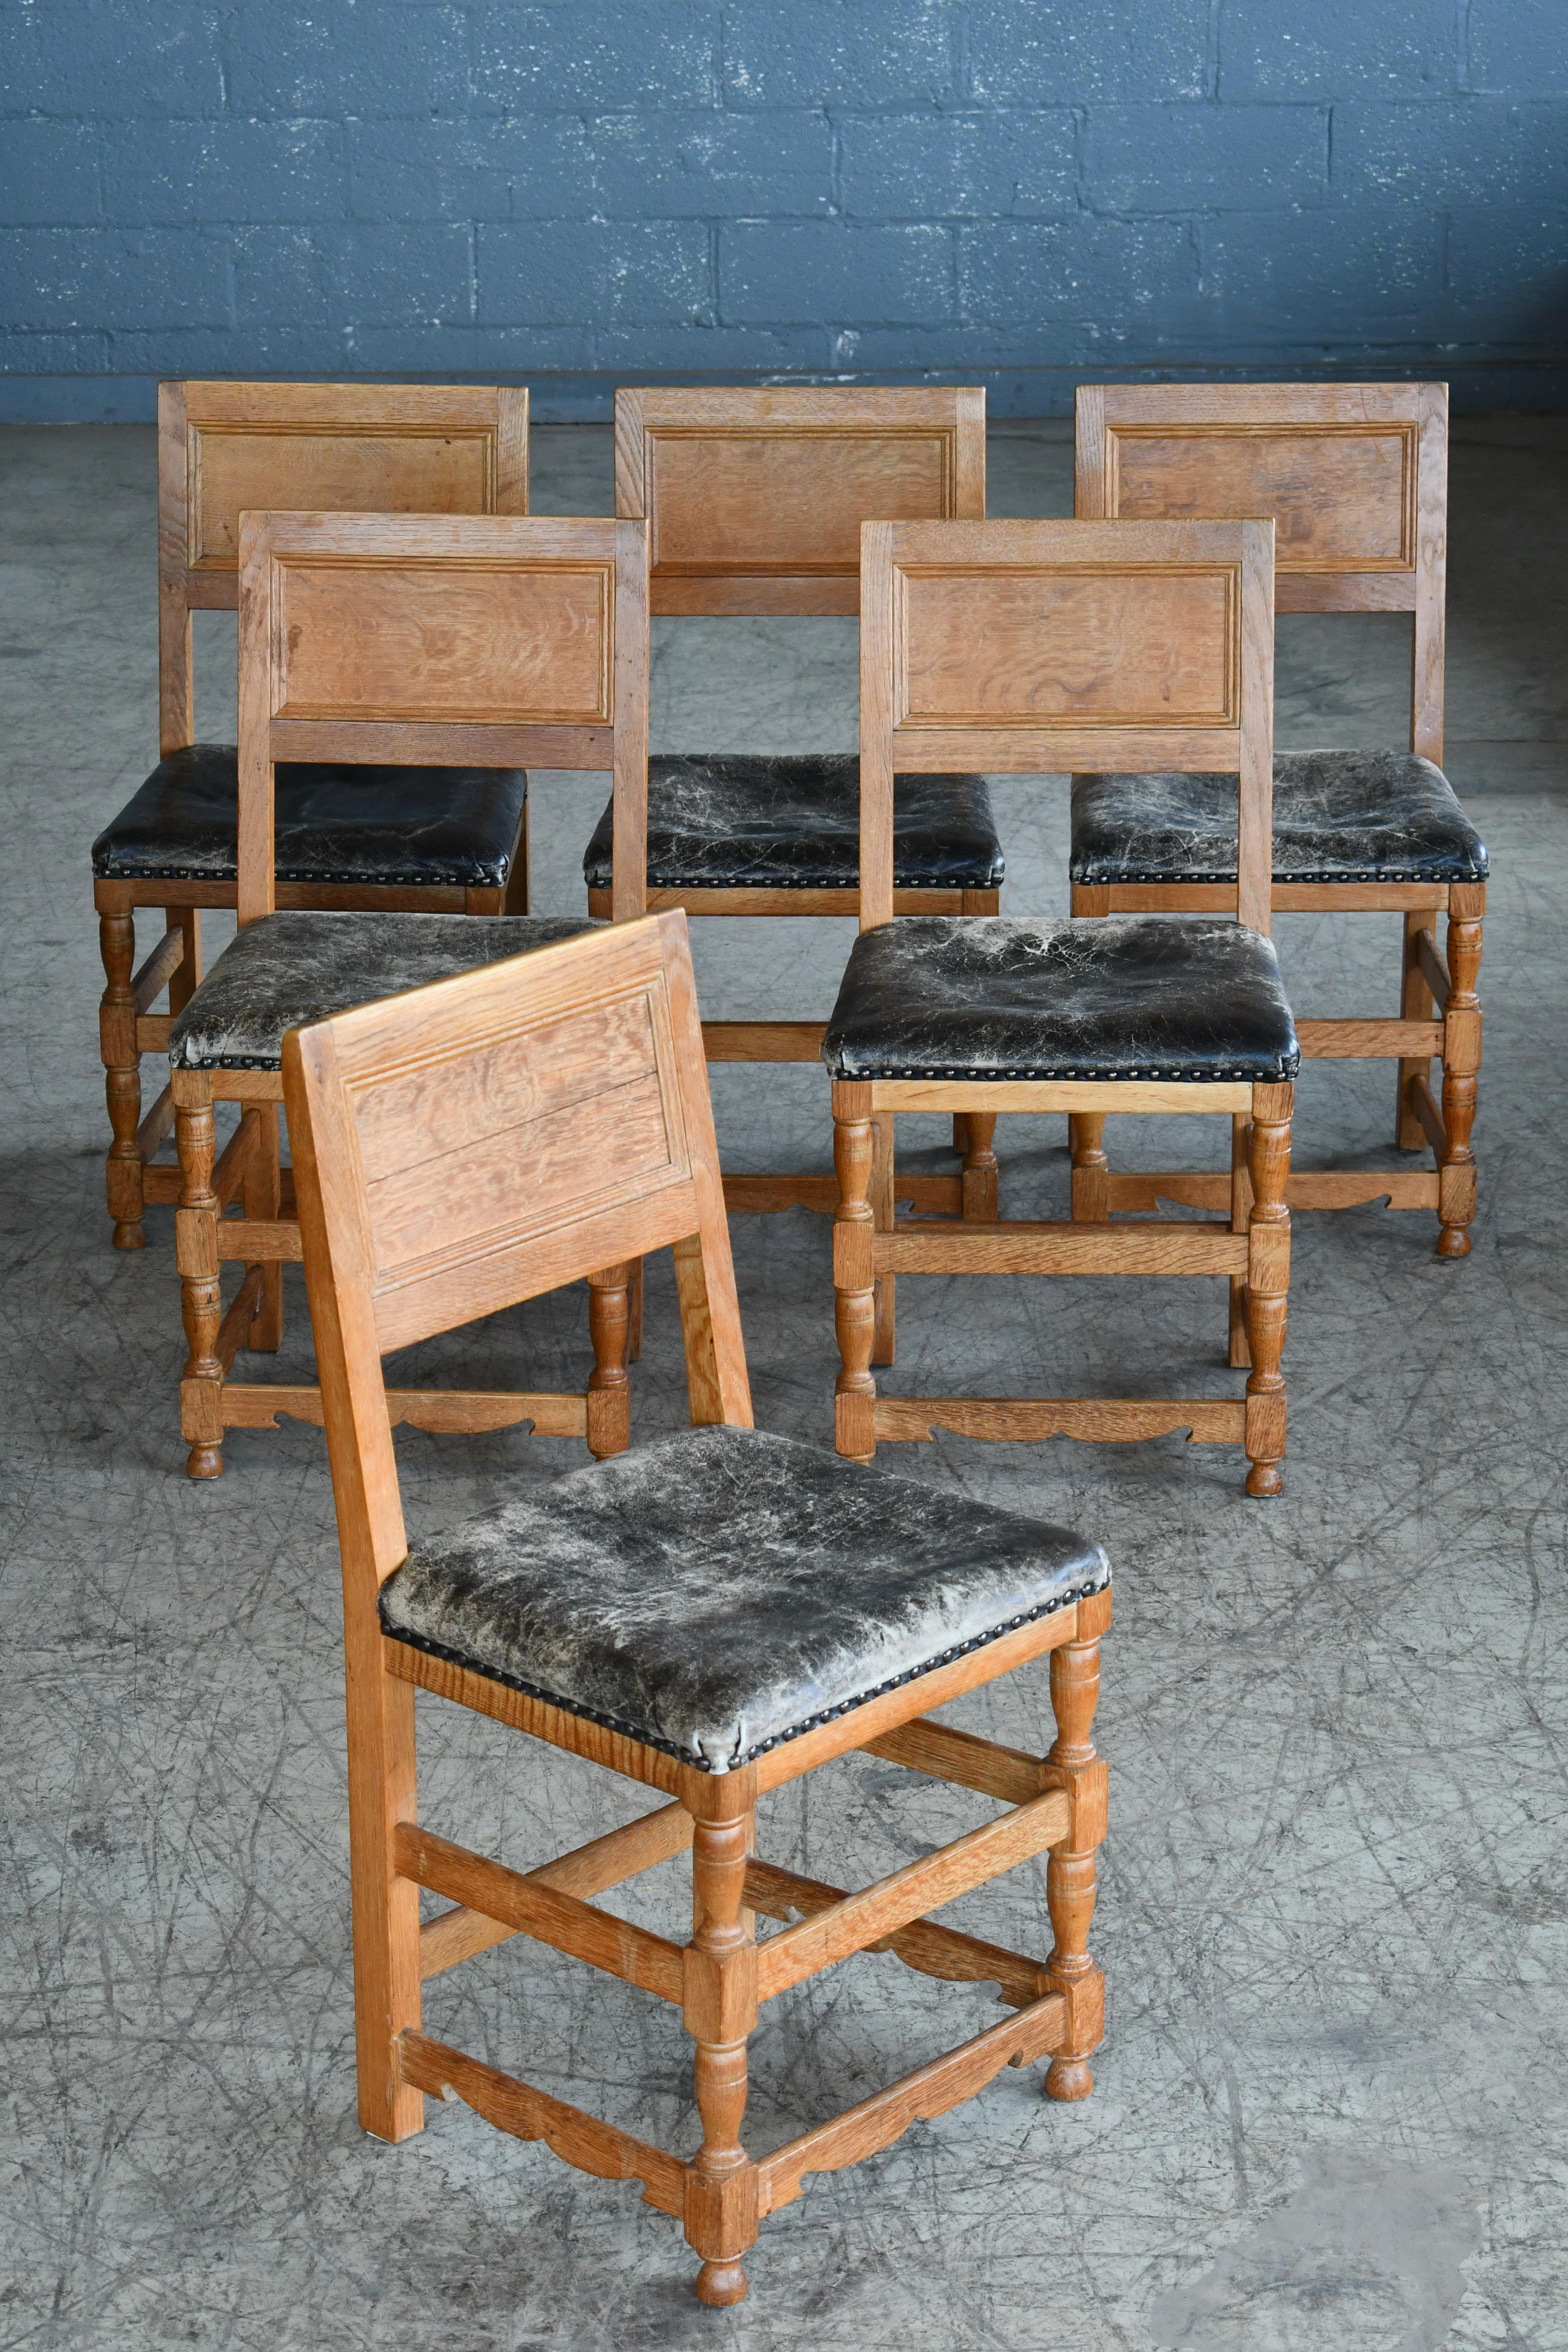 Great Danish dining chairs made round 1900. Rustic and very elegant in their simplicity, Made from oak and with leather seats that have obtained near perfect wear and patina over the years but are not ripped or torn. Sturdy and strong and overall